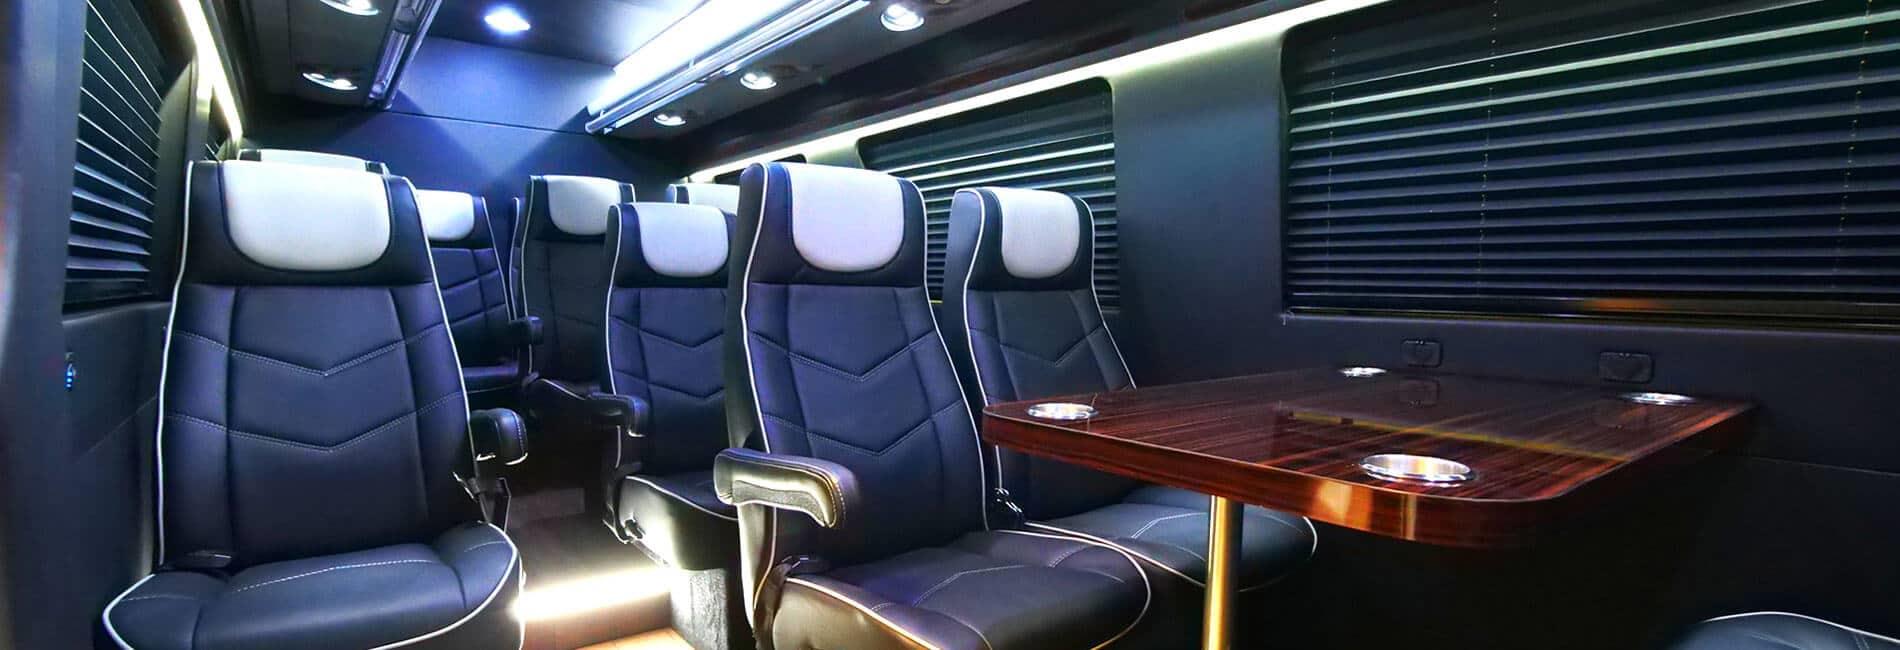 Providing a safe and luxurious travel environment capable of fitting 11 to 19 passengers